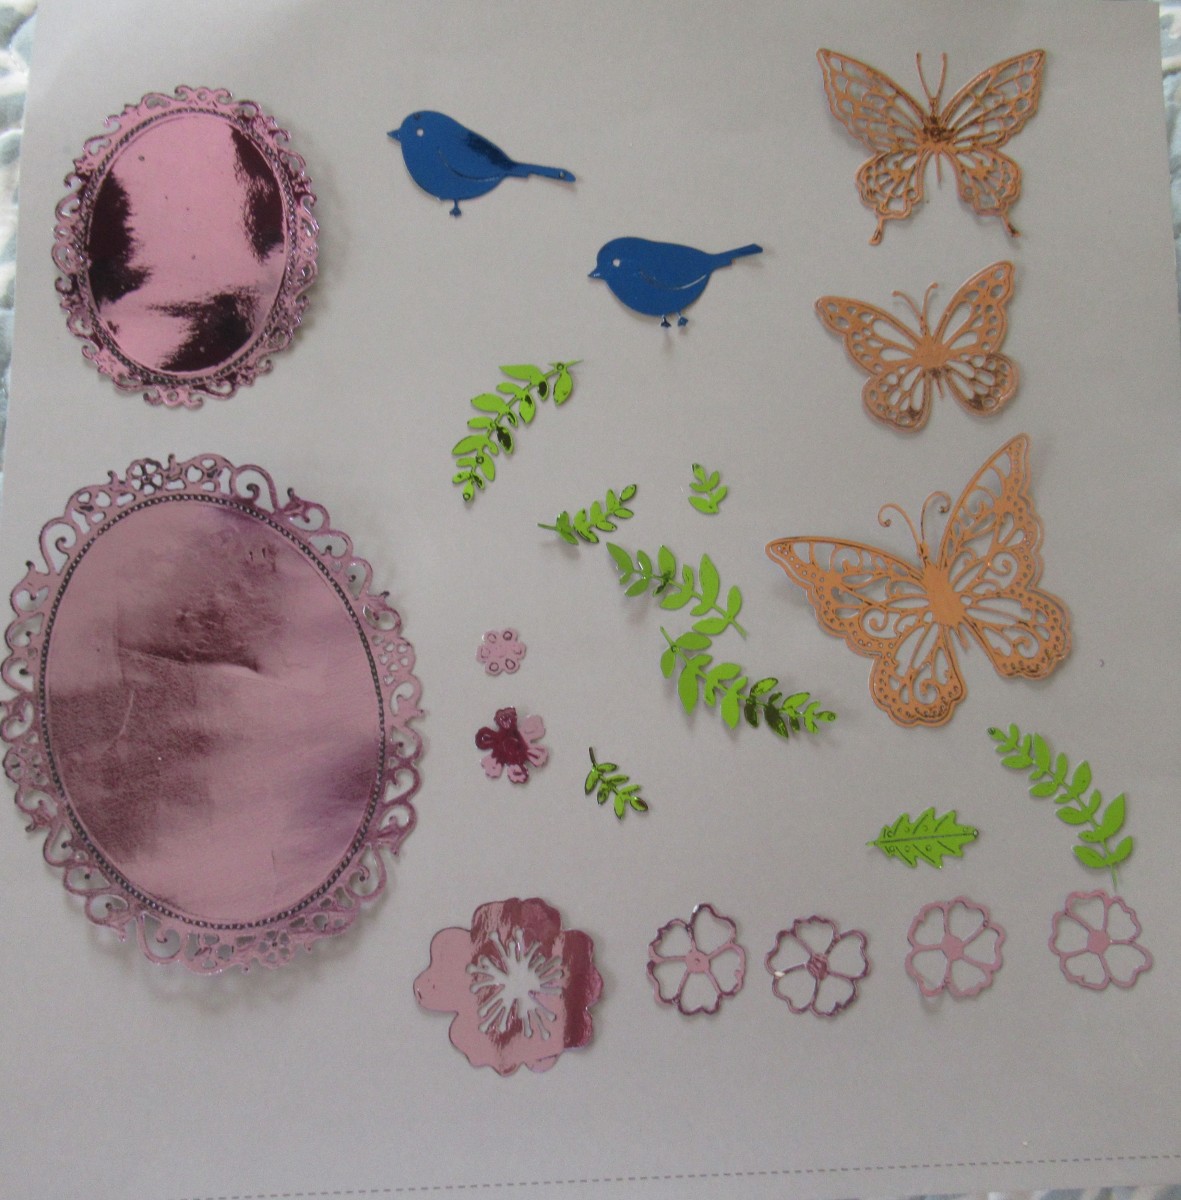 You can die cut toner paper and then run it through a laminator to create amazing embellishments for your scrapbooks, cards and journals